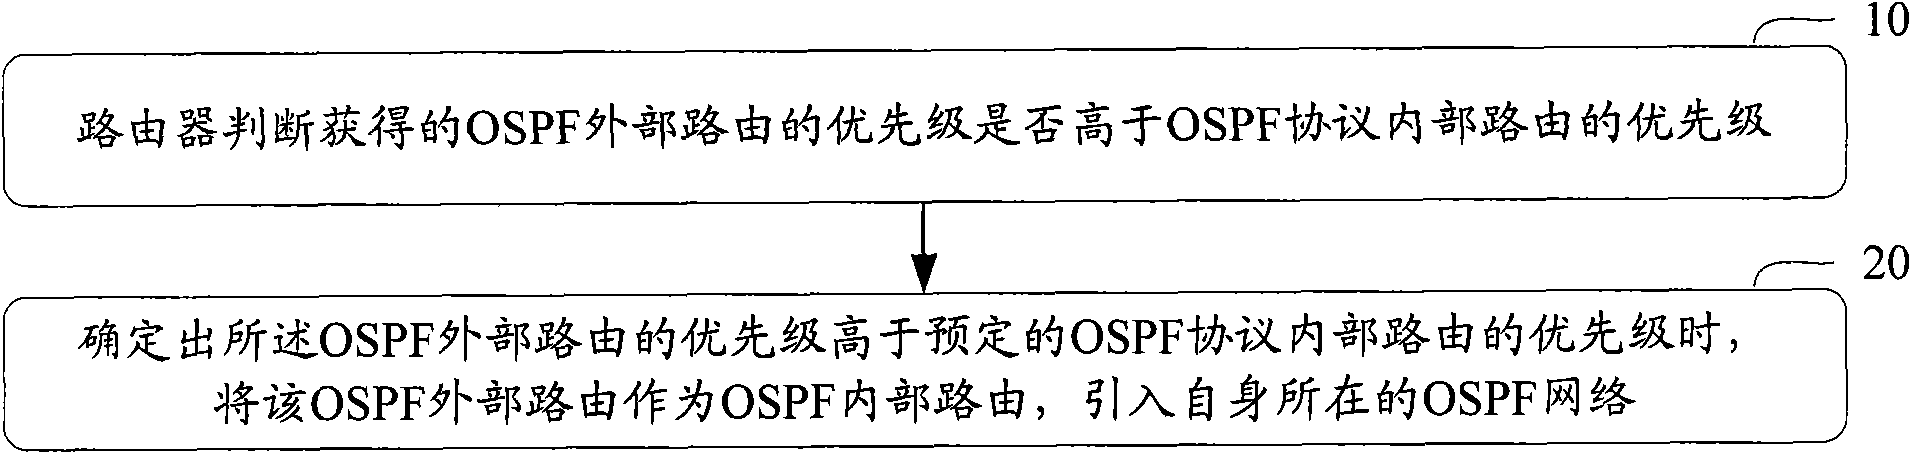 Method and relevant equipment for introducing external route to OSPF (Open Shortest Path First Interior Gateway Protocol) network